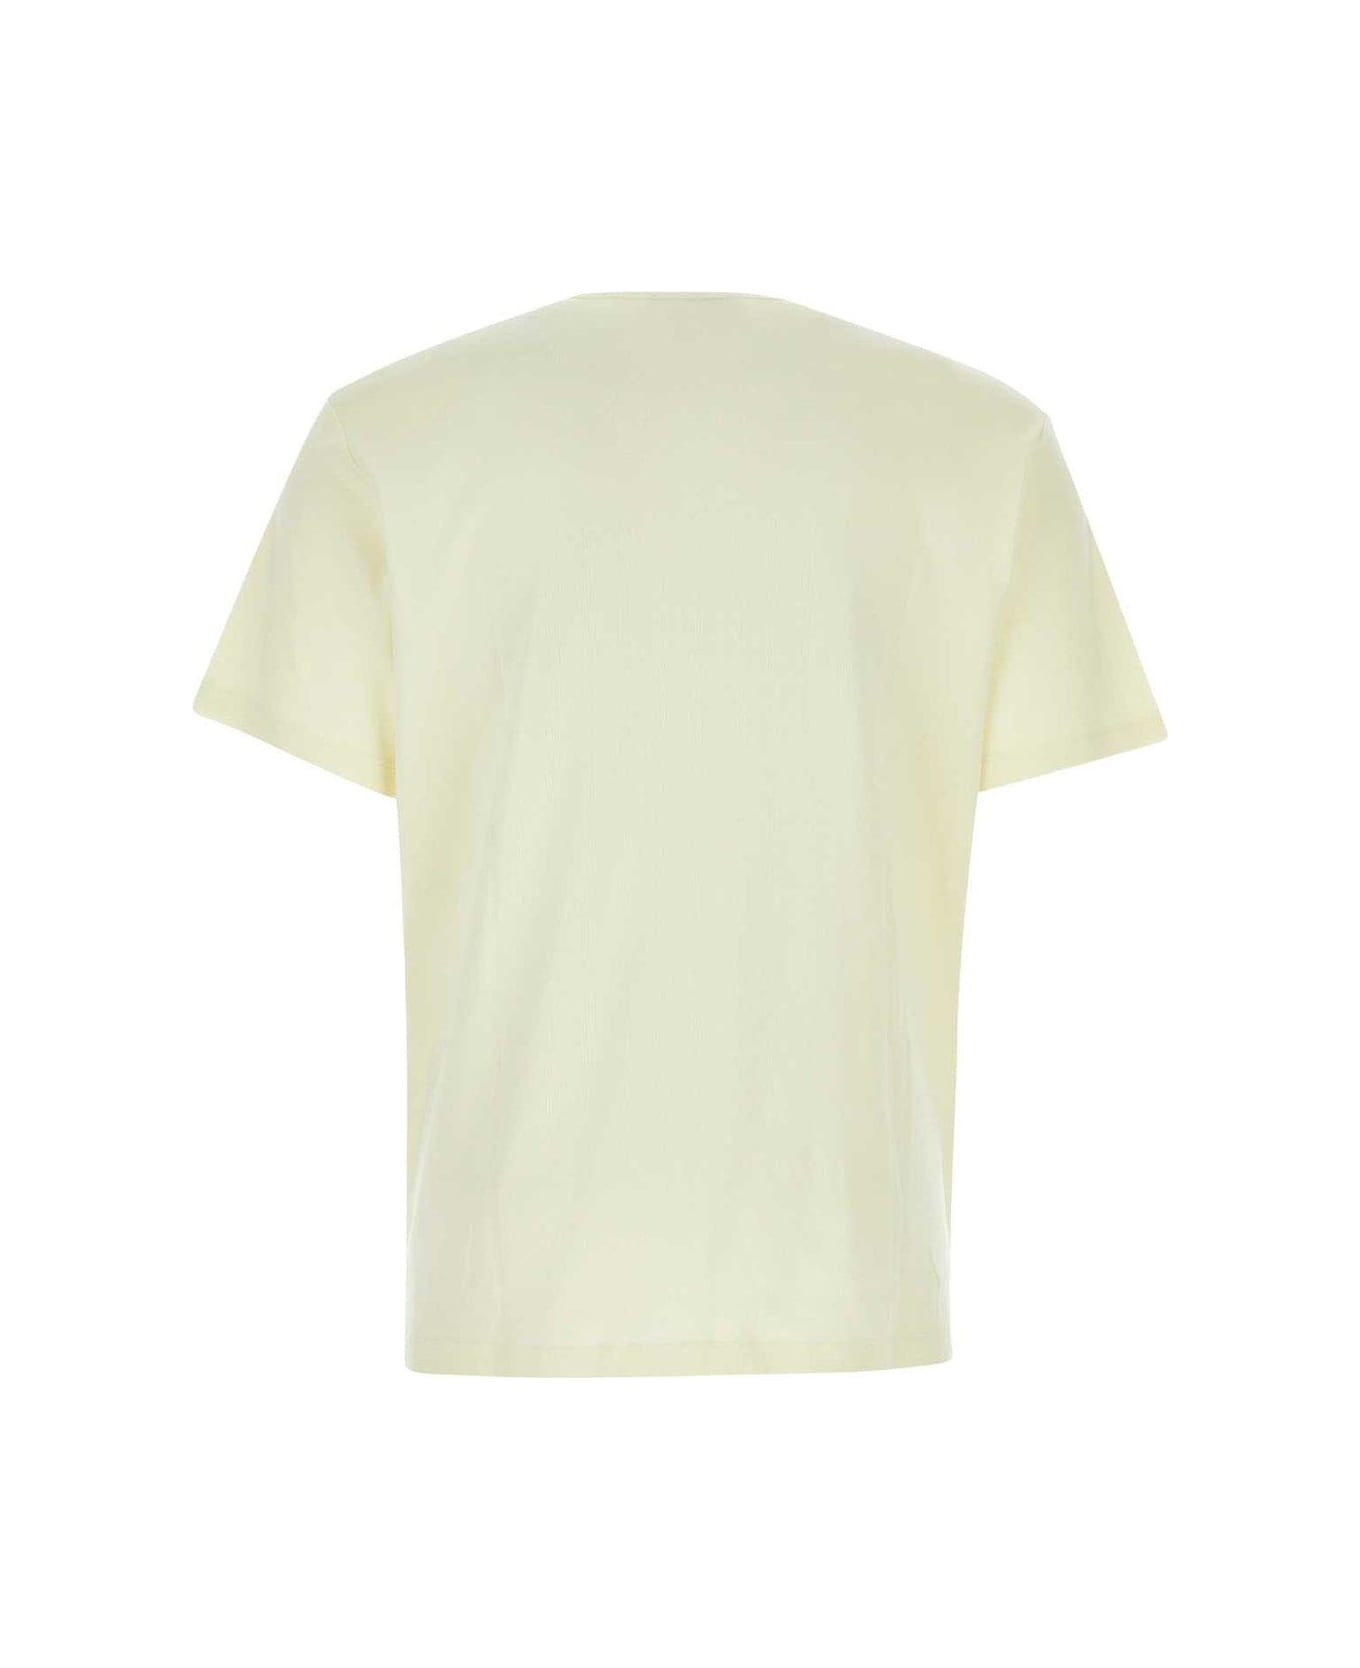 Lemaire Relaxed Fit Crewneck T-shirt - YELLOW シャツ